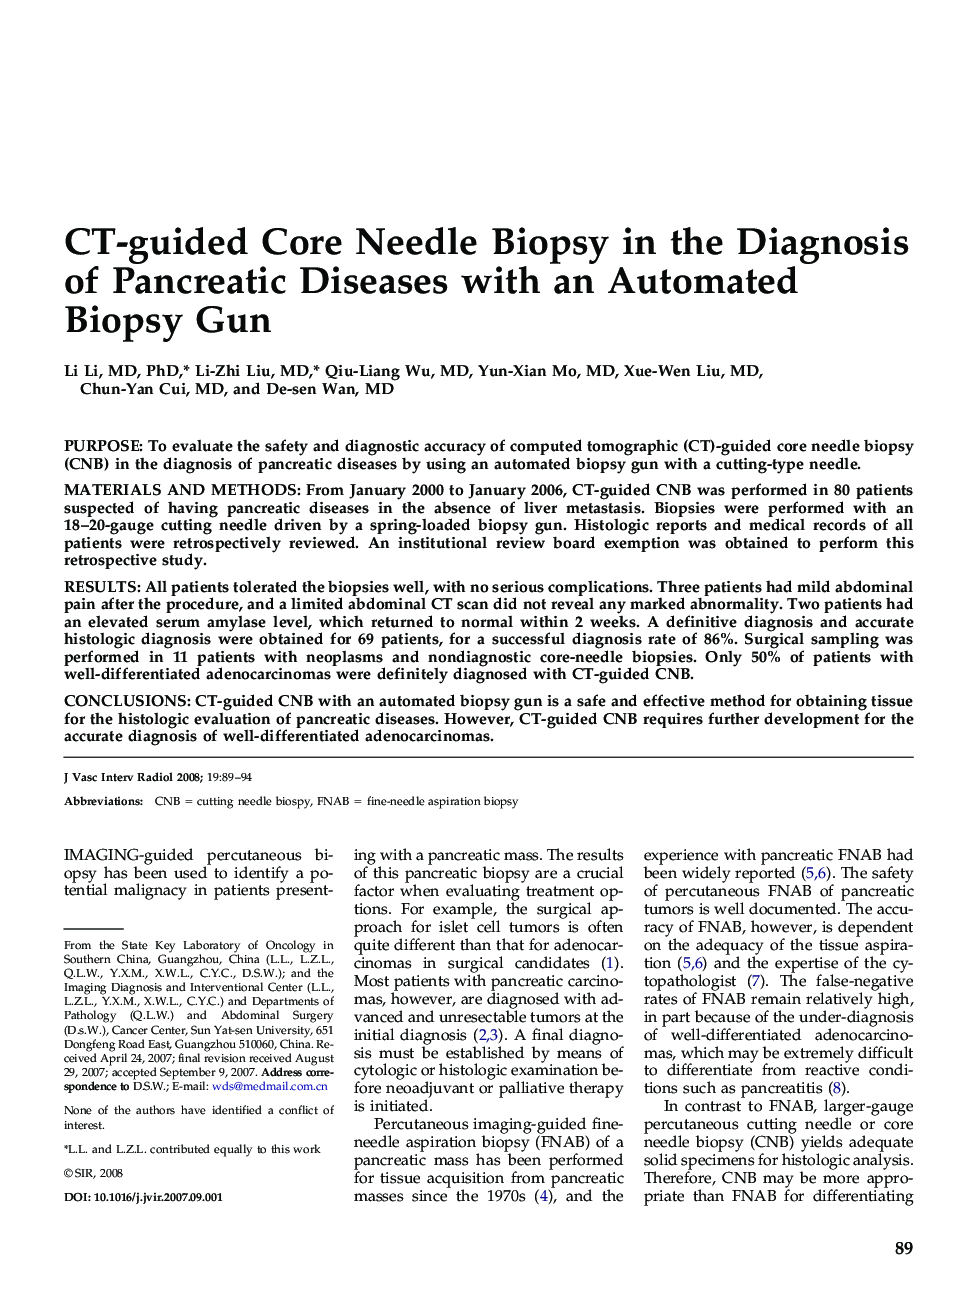 CT-guided Core Needle Biopsy in the Diagnosis of Pancreatic Diseases with an Automated Biopsy Gun